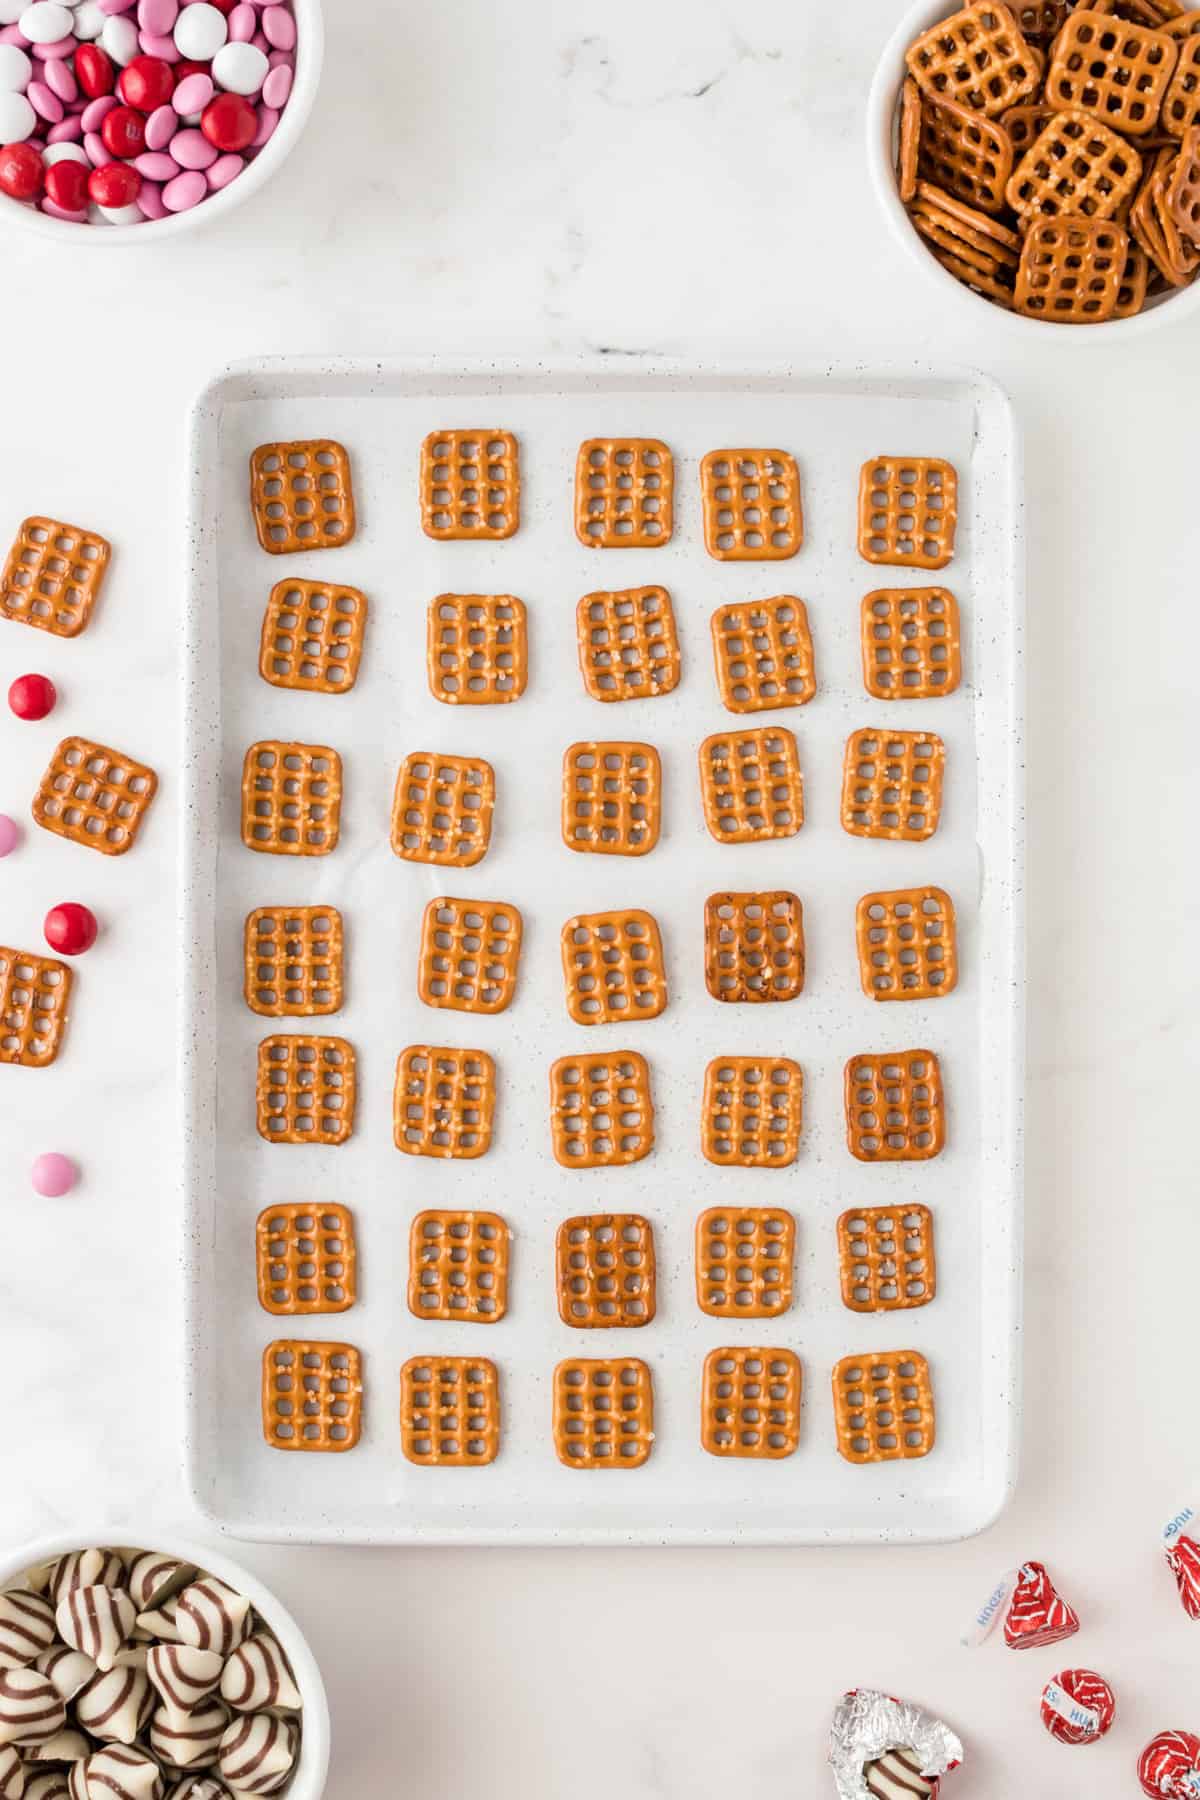 On a Baking sheet lined with Parchment Paper place as many square pretzels as you'd like.